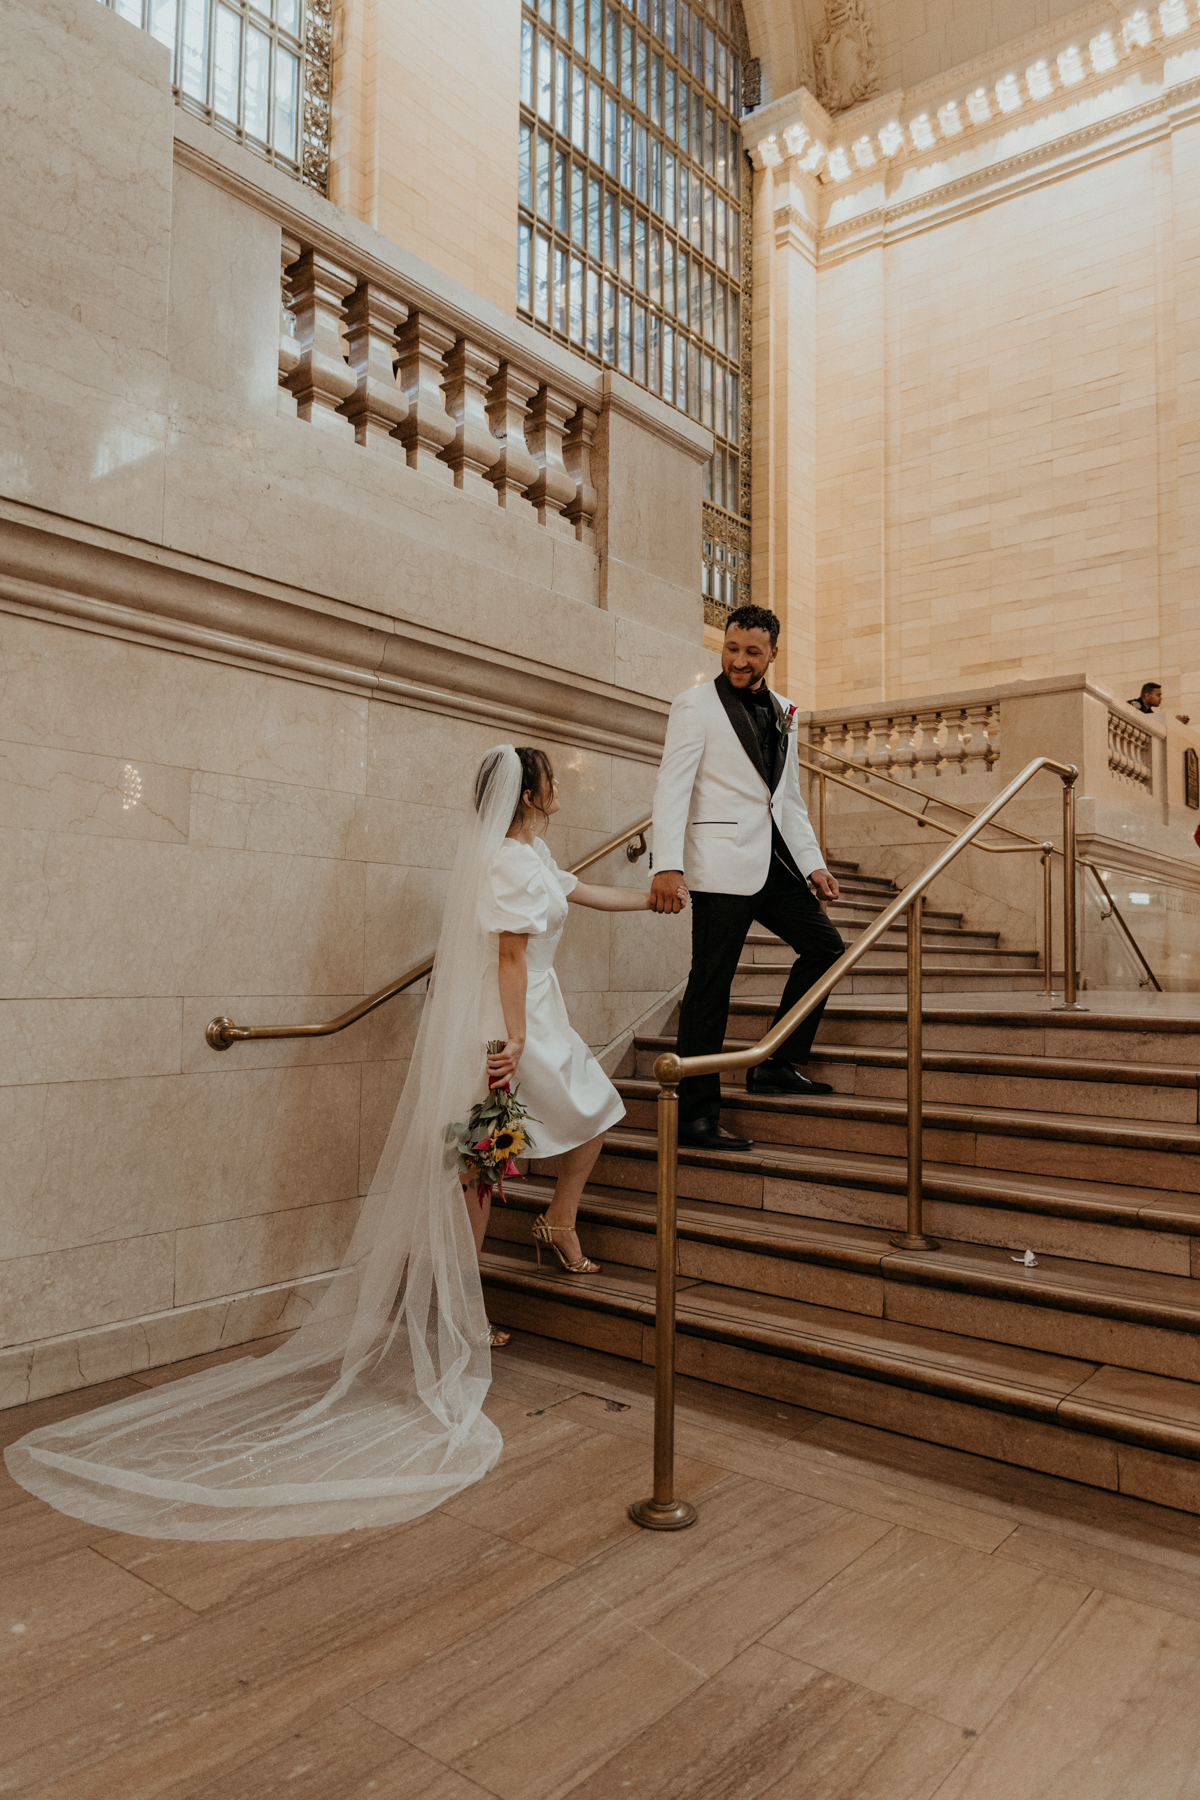 bride wearing short wedding dress with long veil and groom wearing white suit jacket with black pants walk together up the stairs in grand central station in new york city